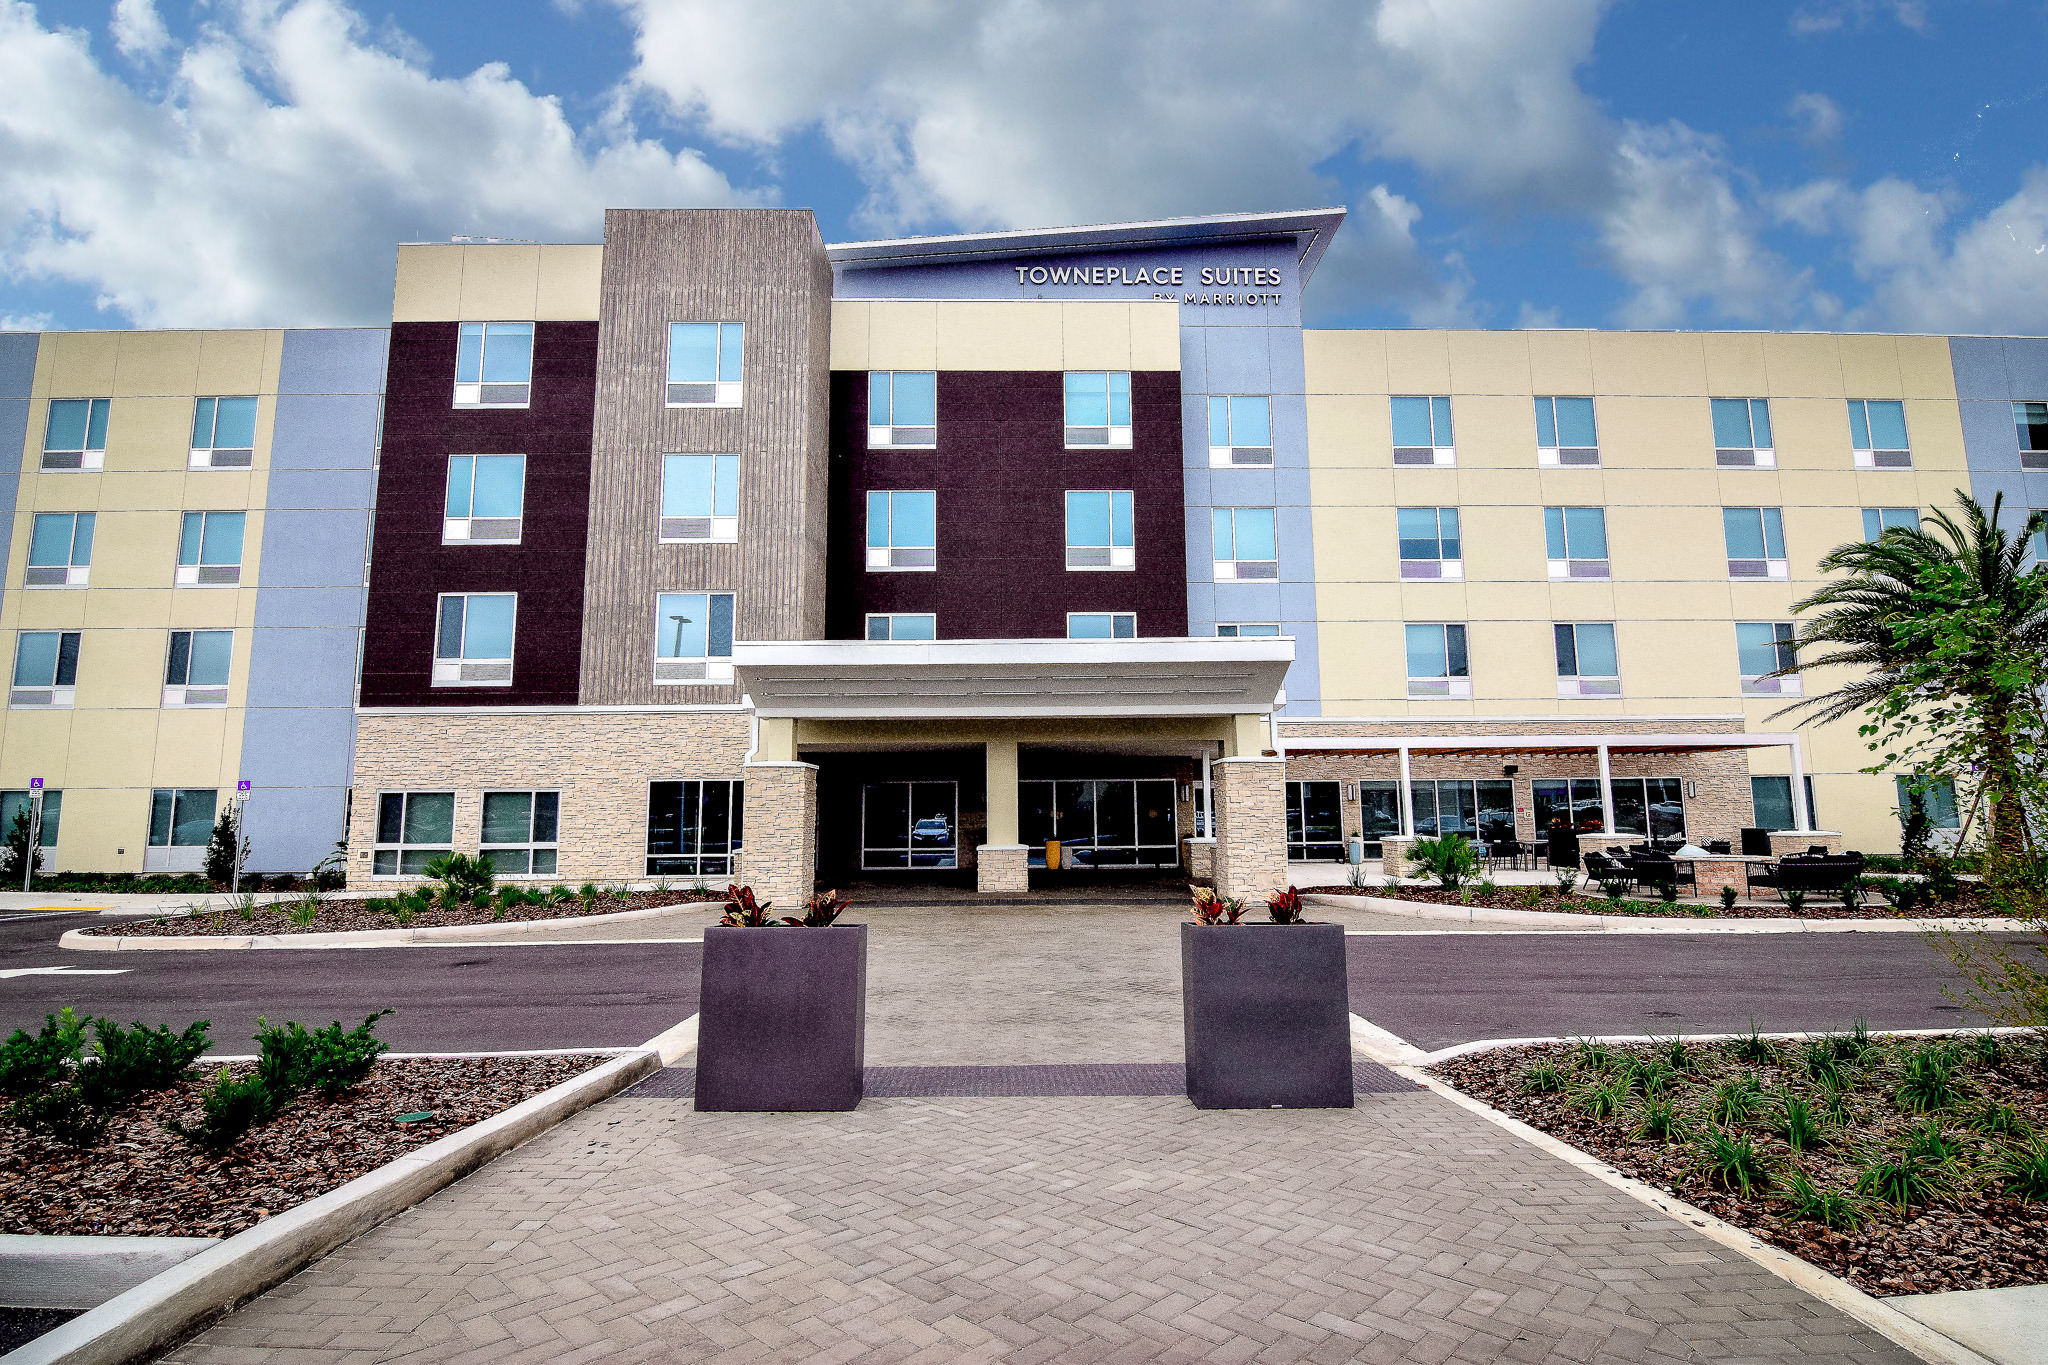 Photo of TownePlace Suites by Marriott Ocala, Ocala, FL